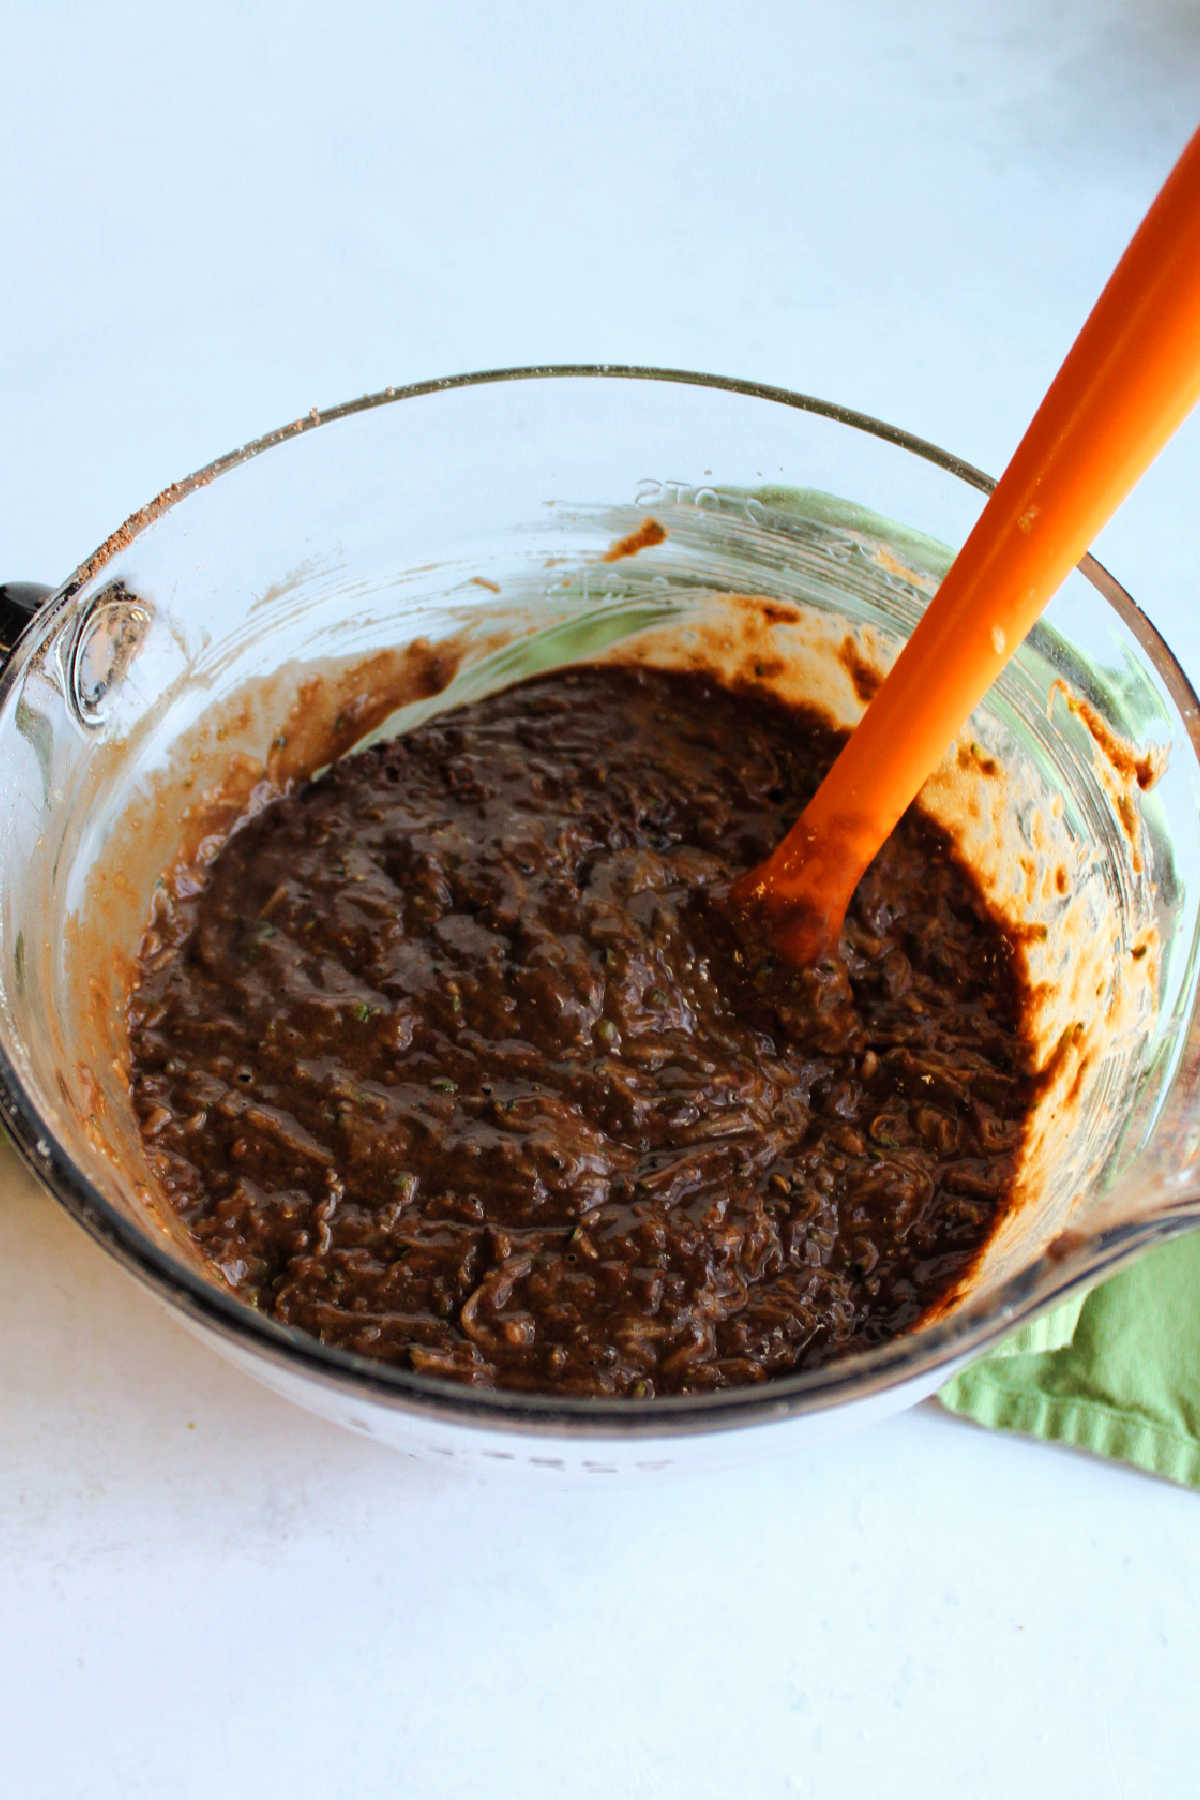 Bowl of chocolate cake batter with shredded zucchini inside.